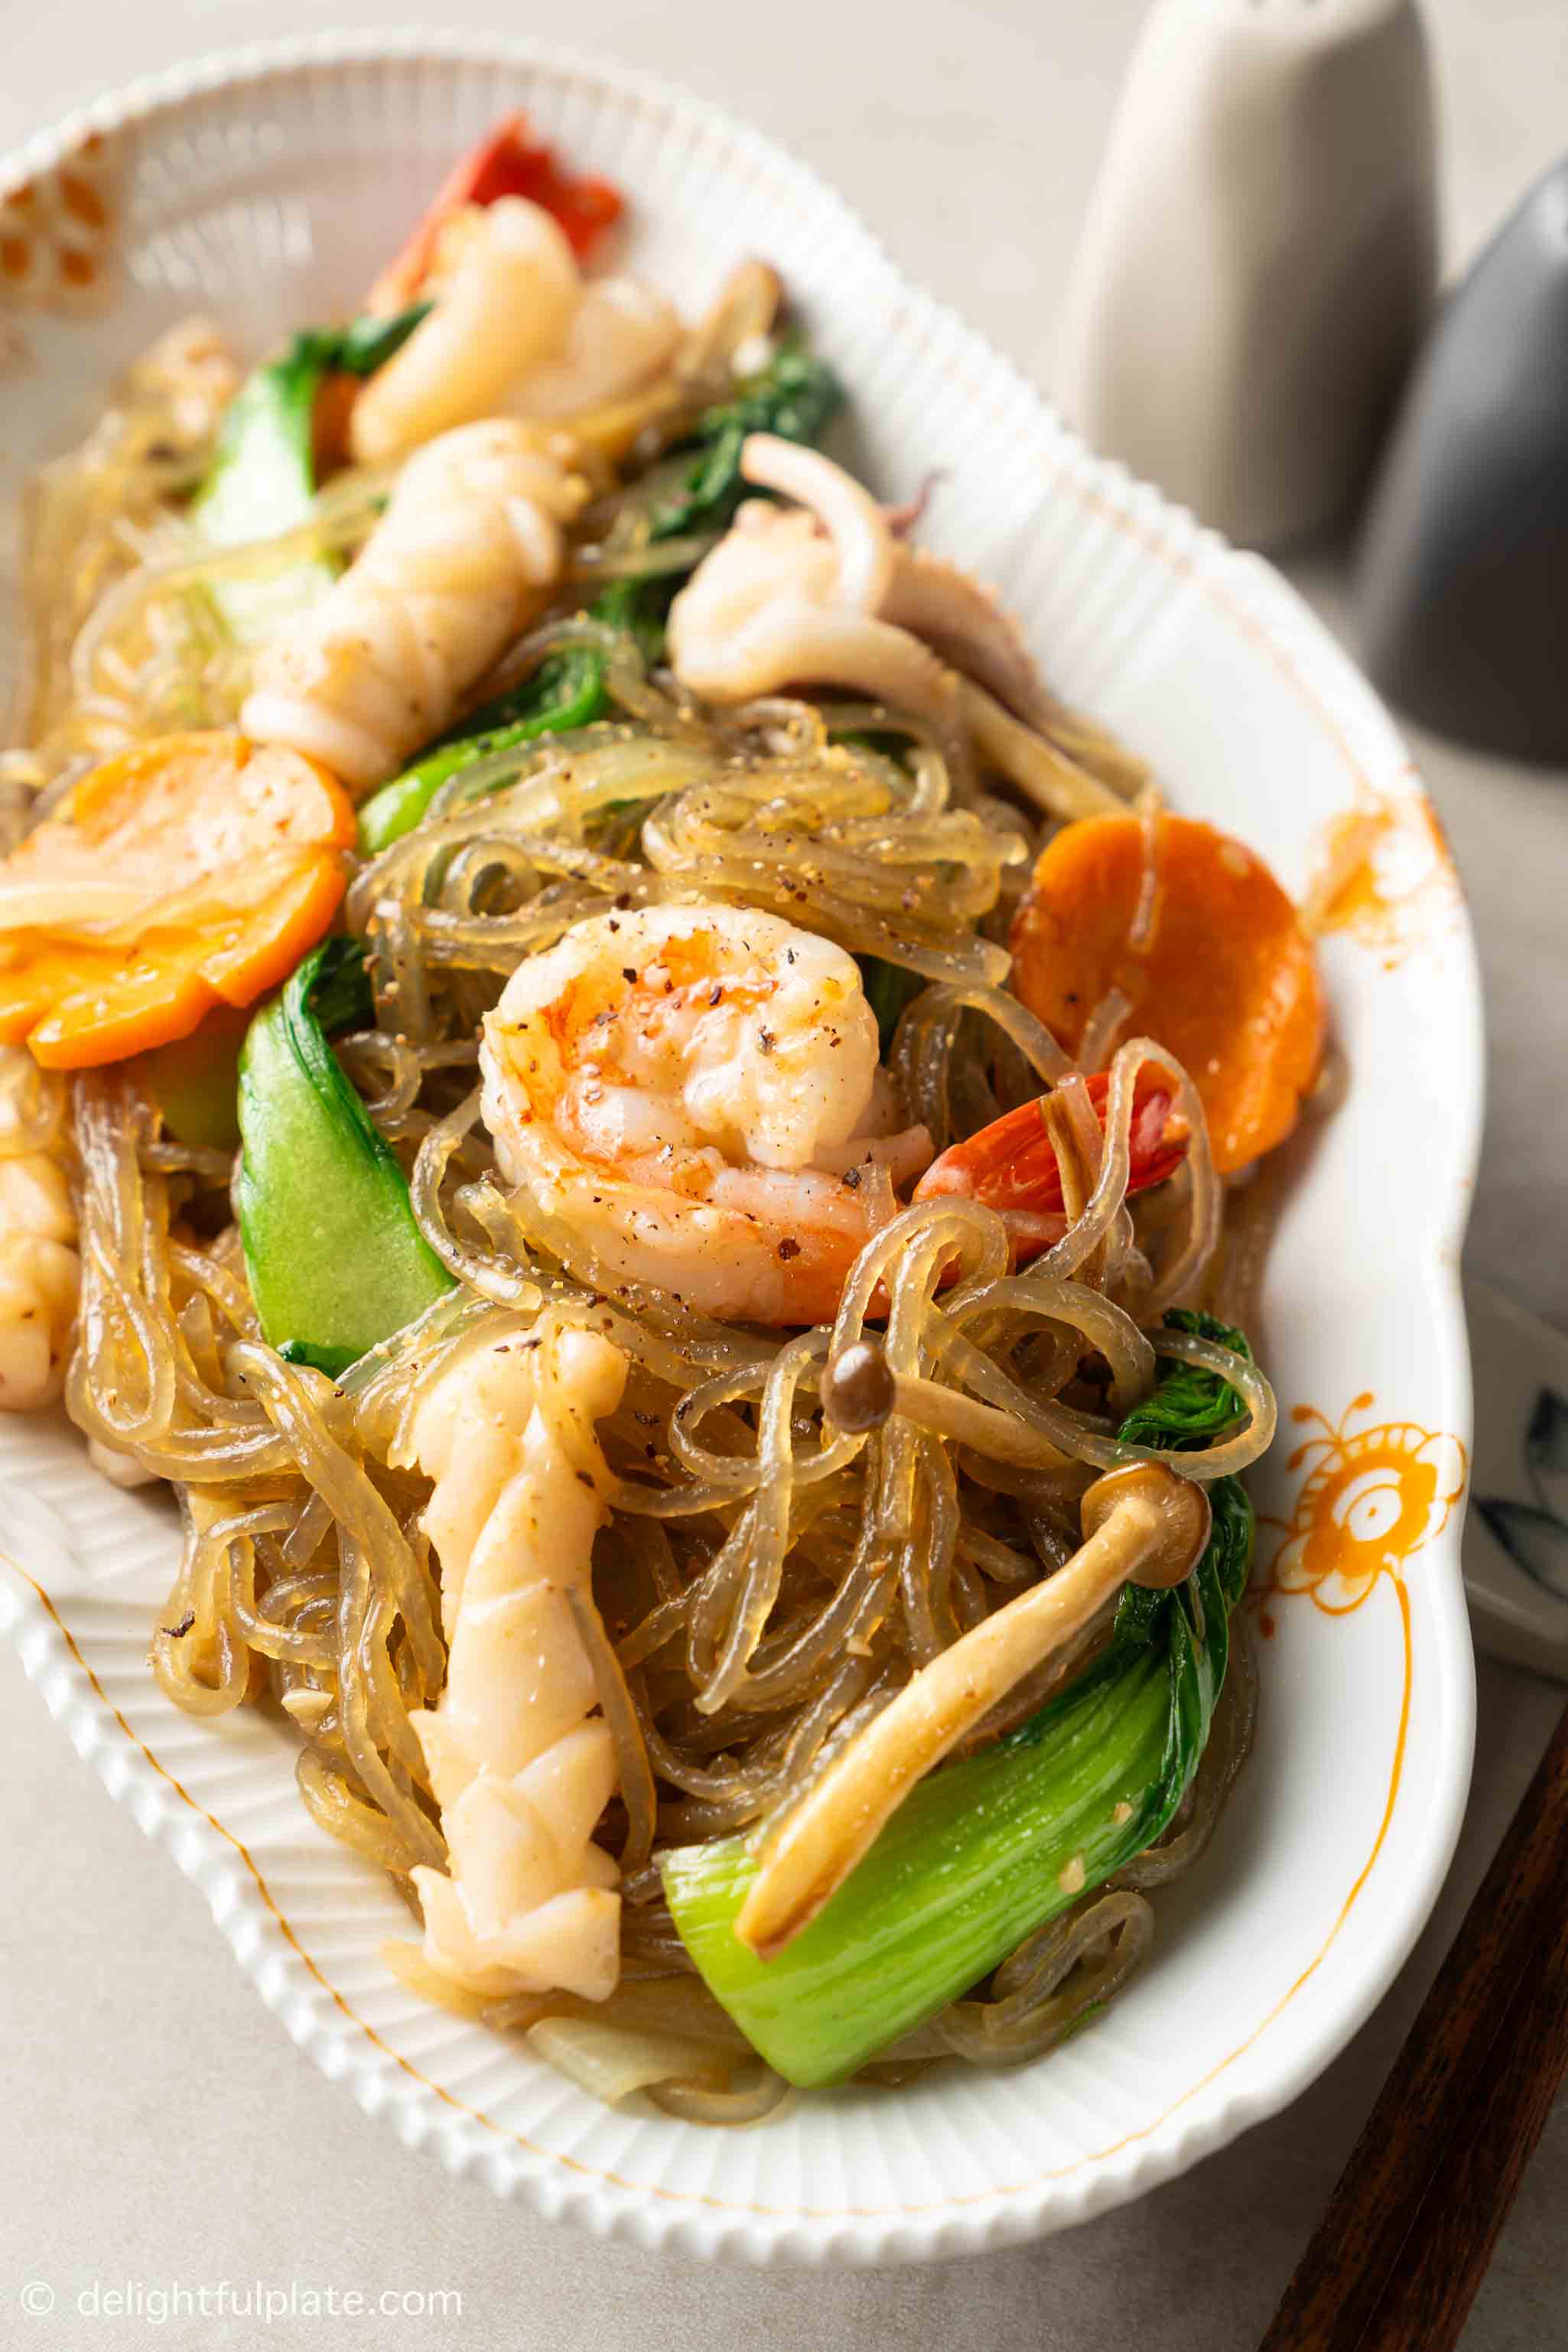 a plate of stir-fried glass noodles with seafood.